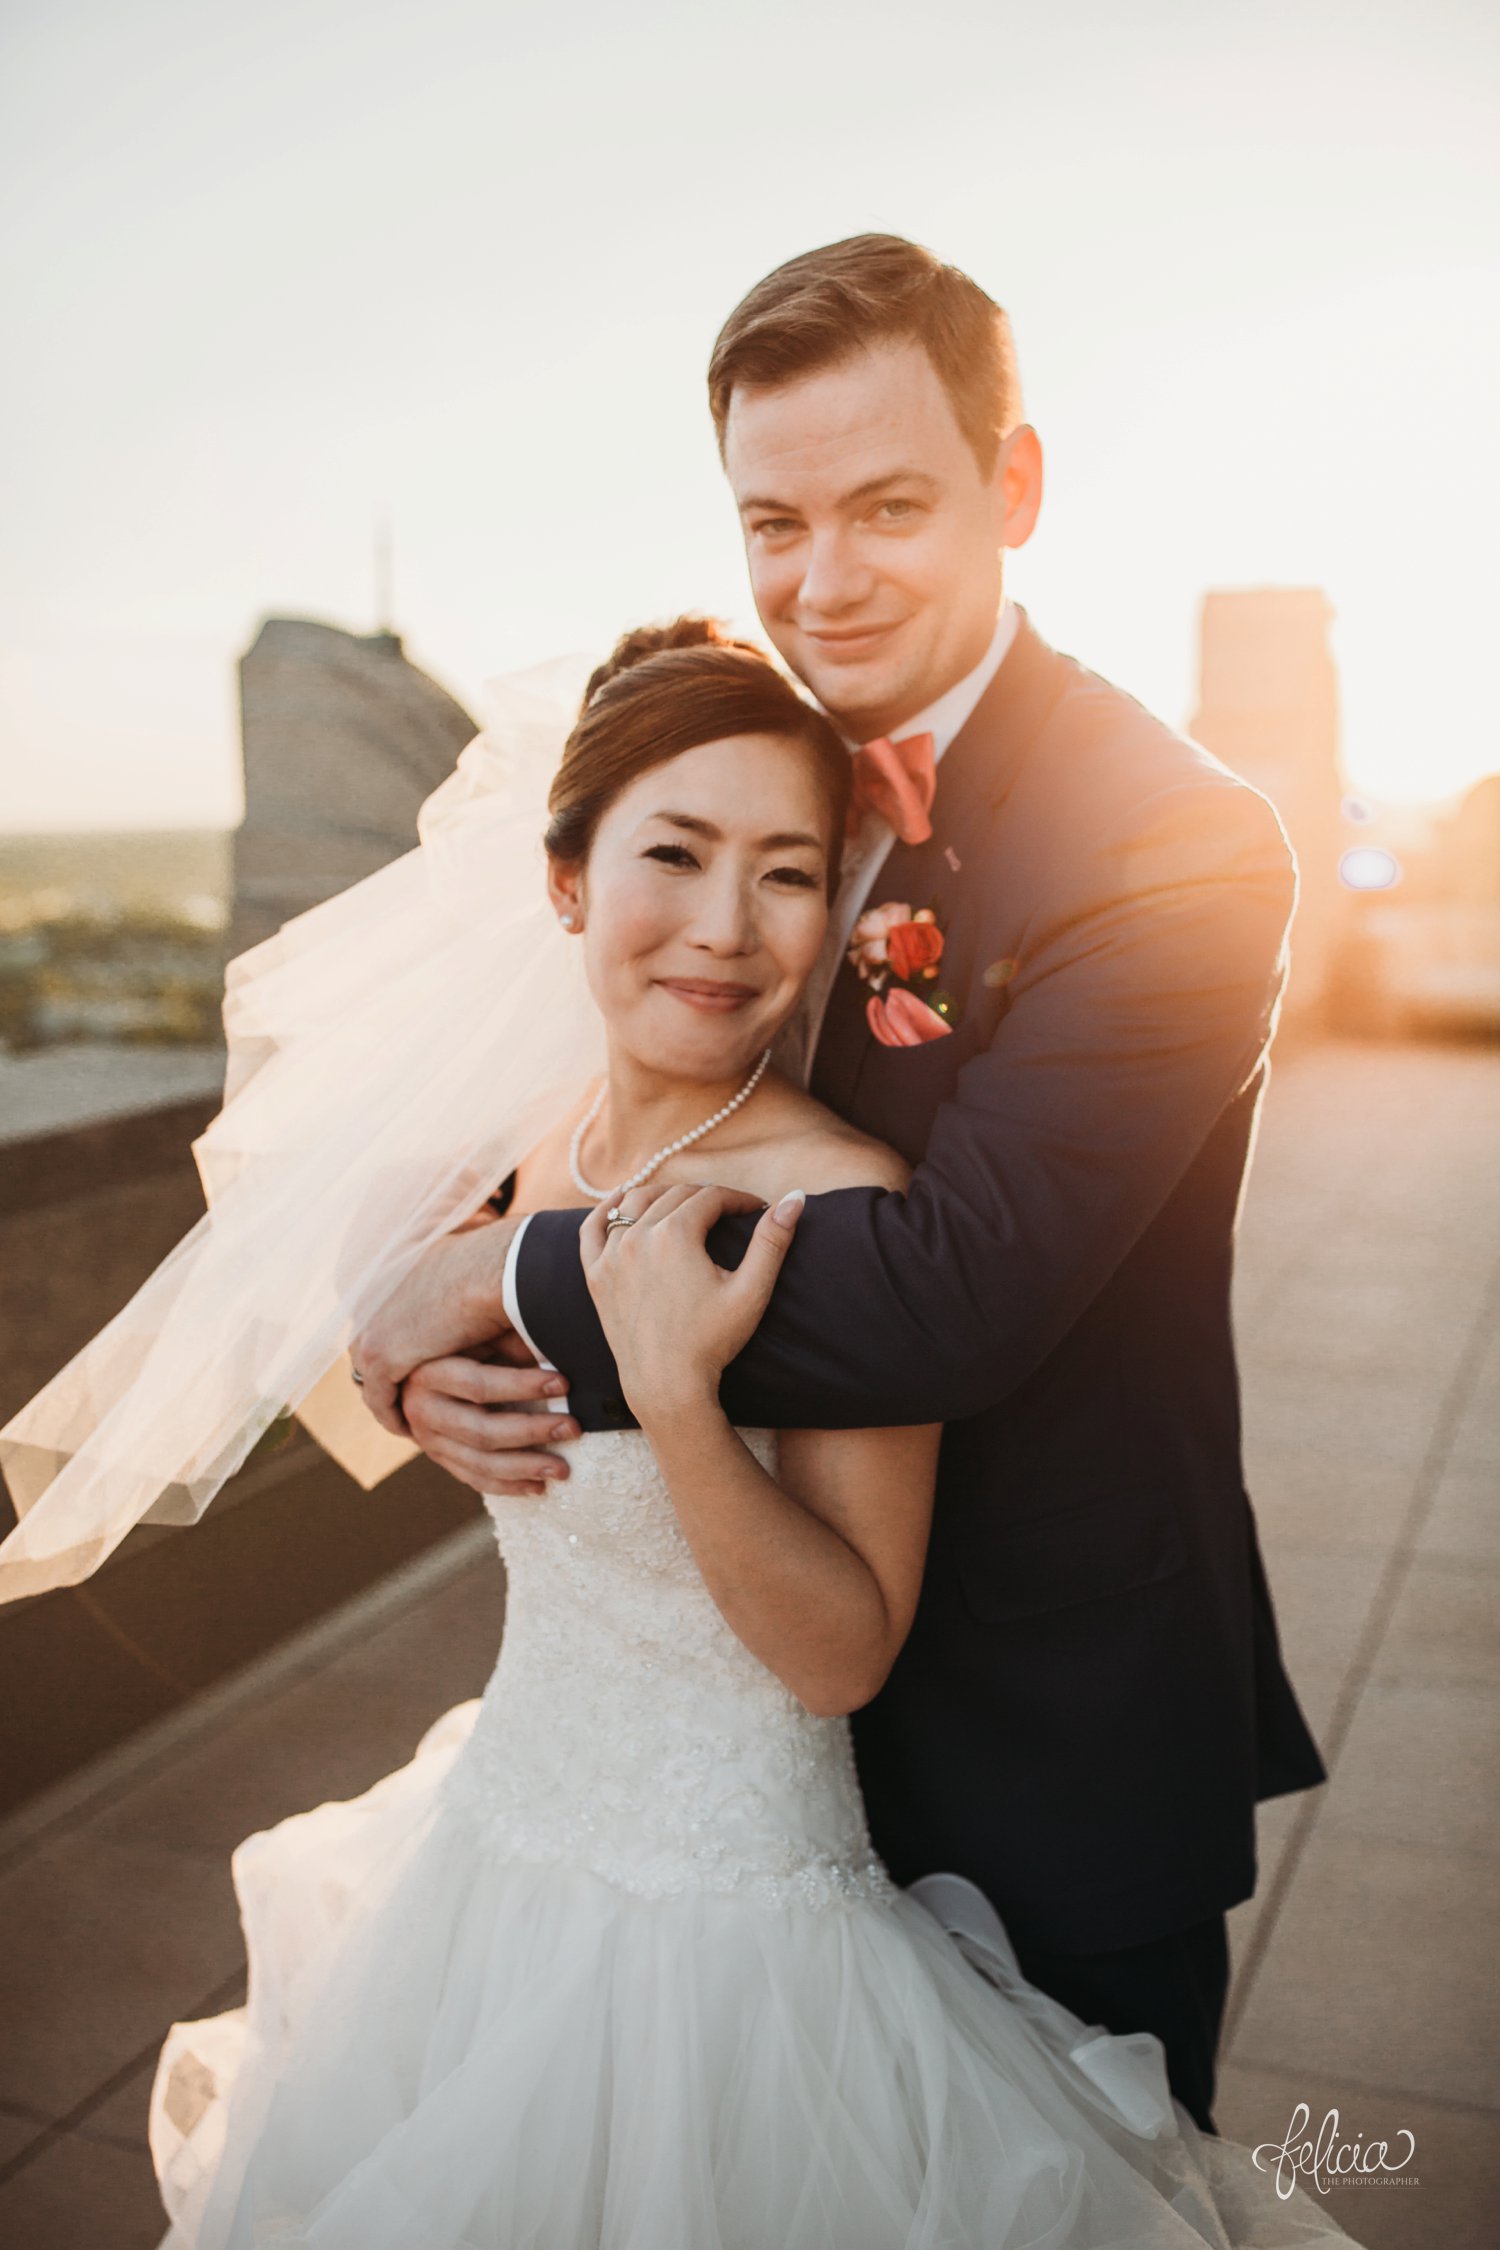 images by feliciathephotographer.com | destination wedding photographer | the grand hall at power and light | kansas city | missouri | downtown | glamorous | multicultural | sunset | golden hour | couple portraits | rooftop | romantic | natural light | pearl necklace | peach bow tie | 